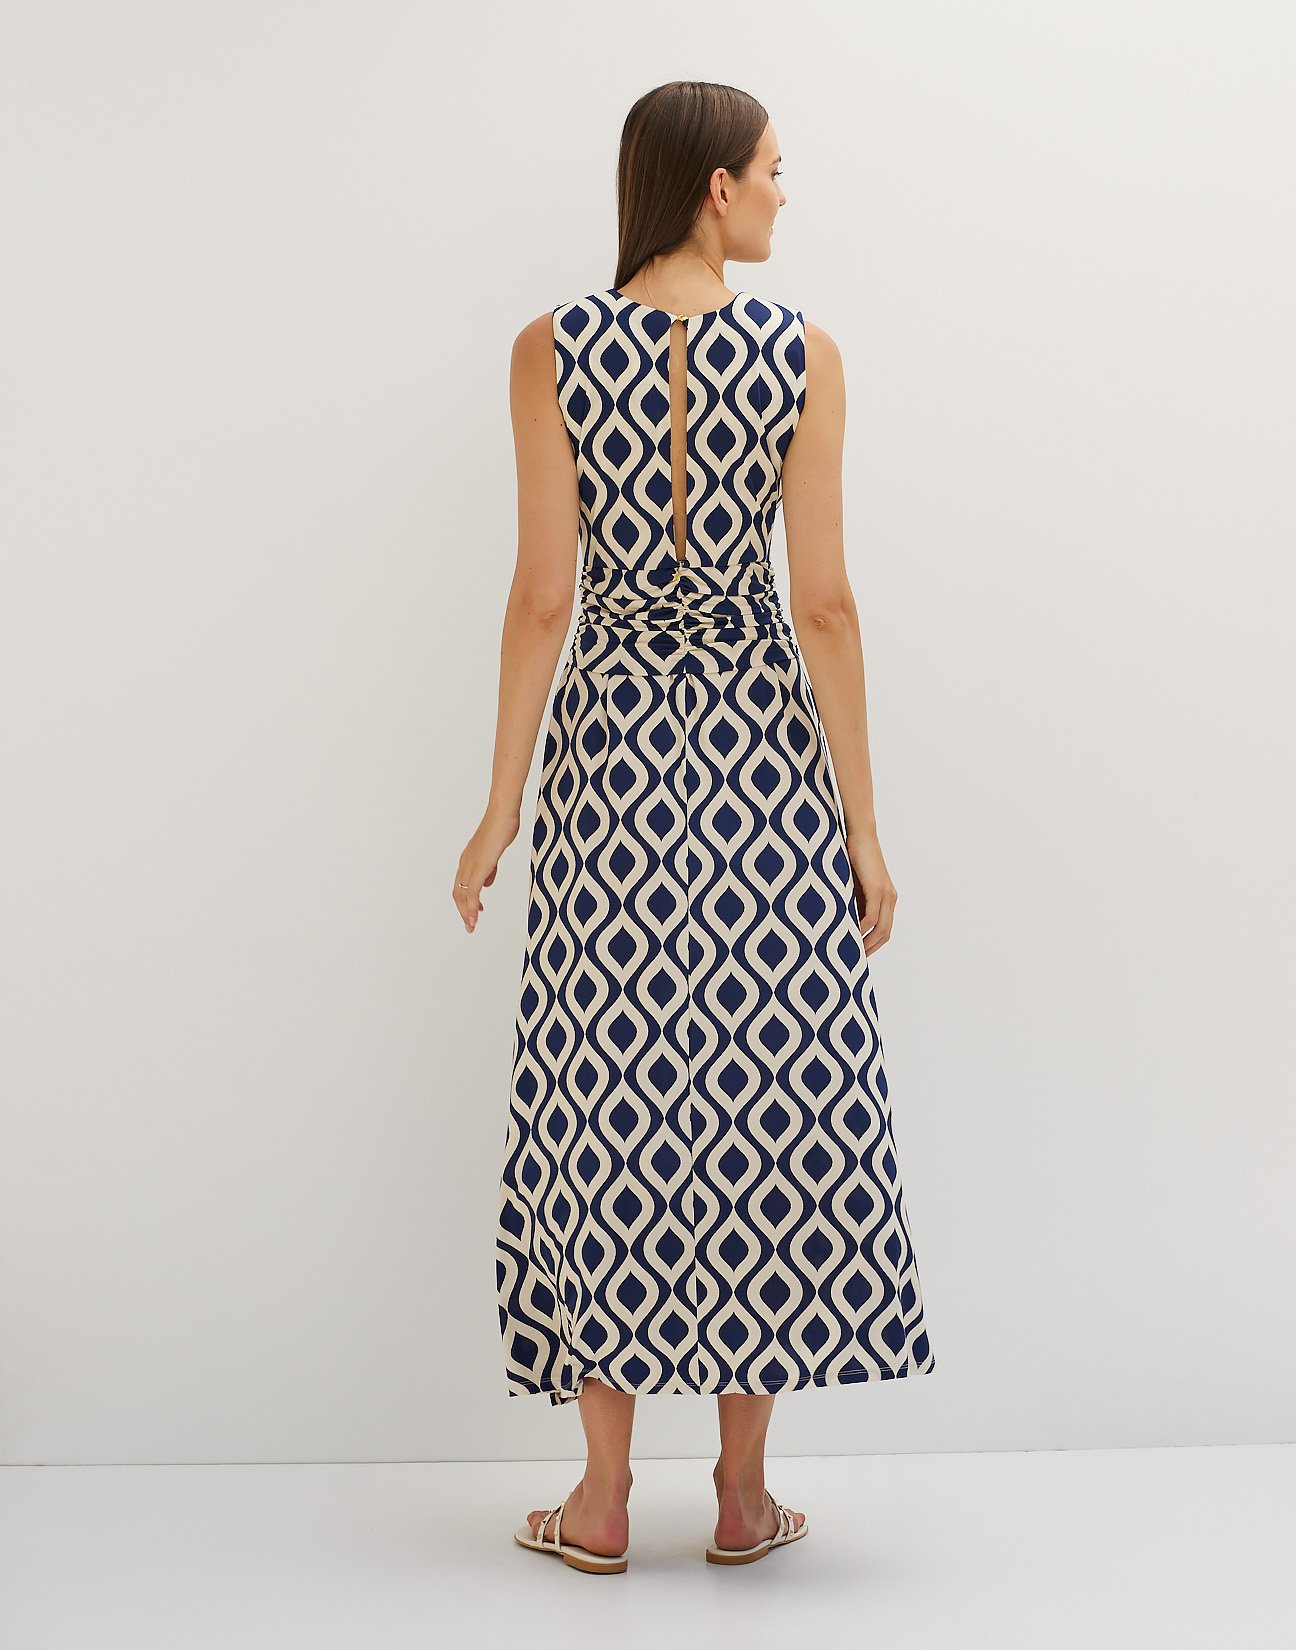 Printed dress with knot